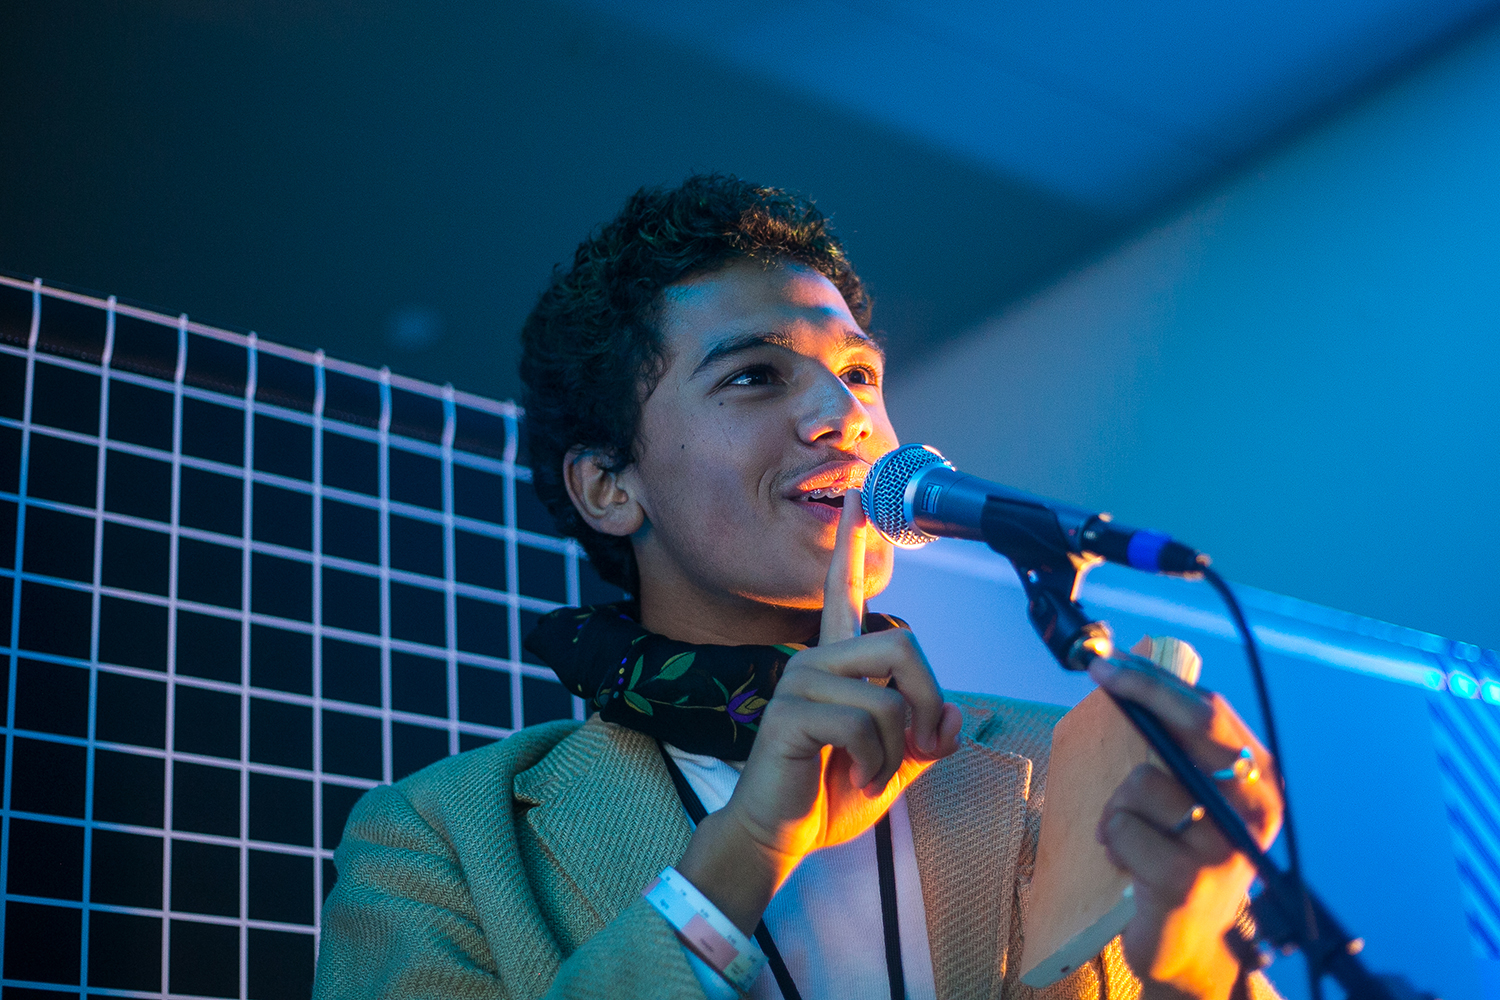 Young person speaking into microphone